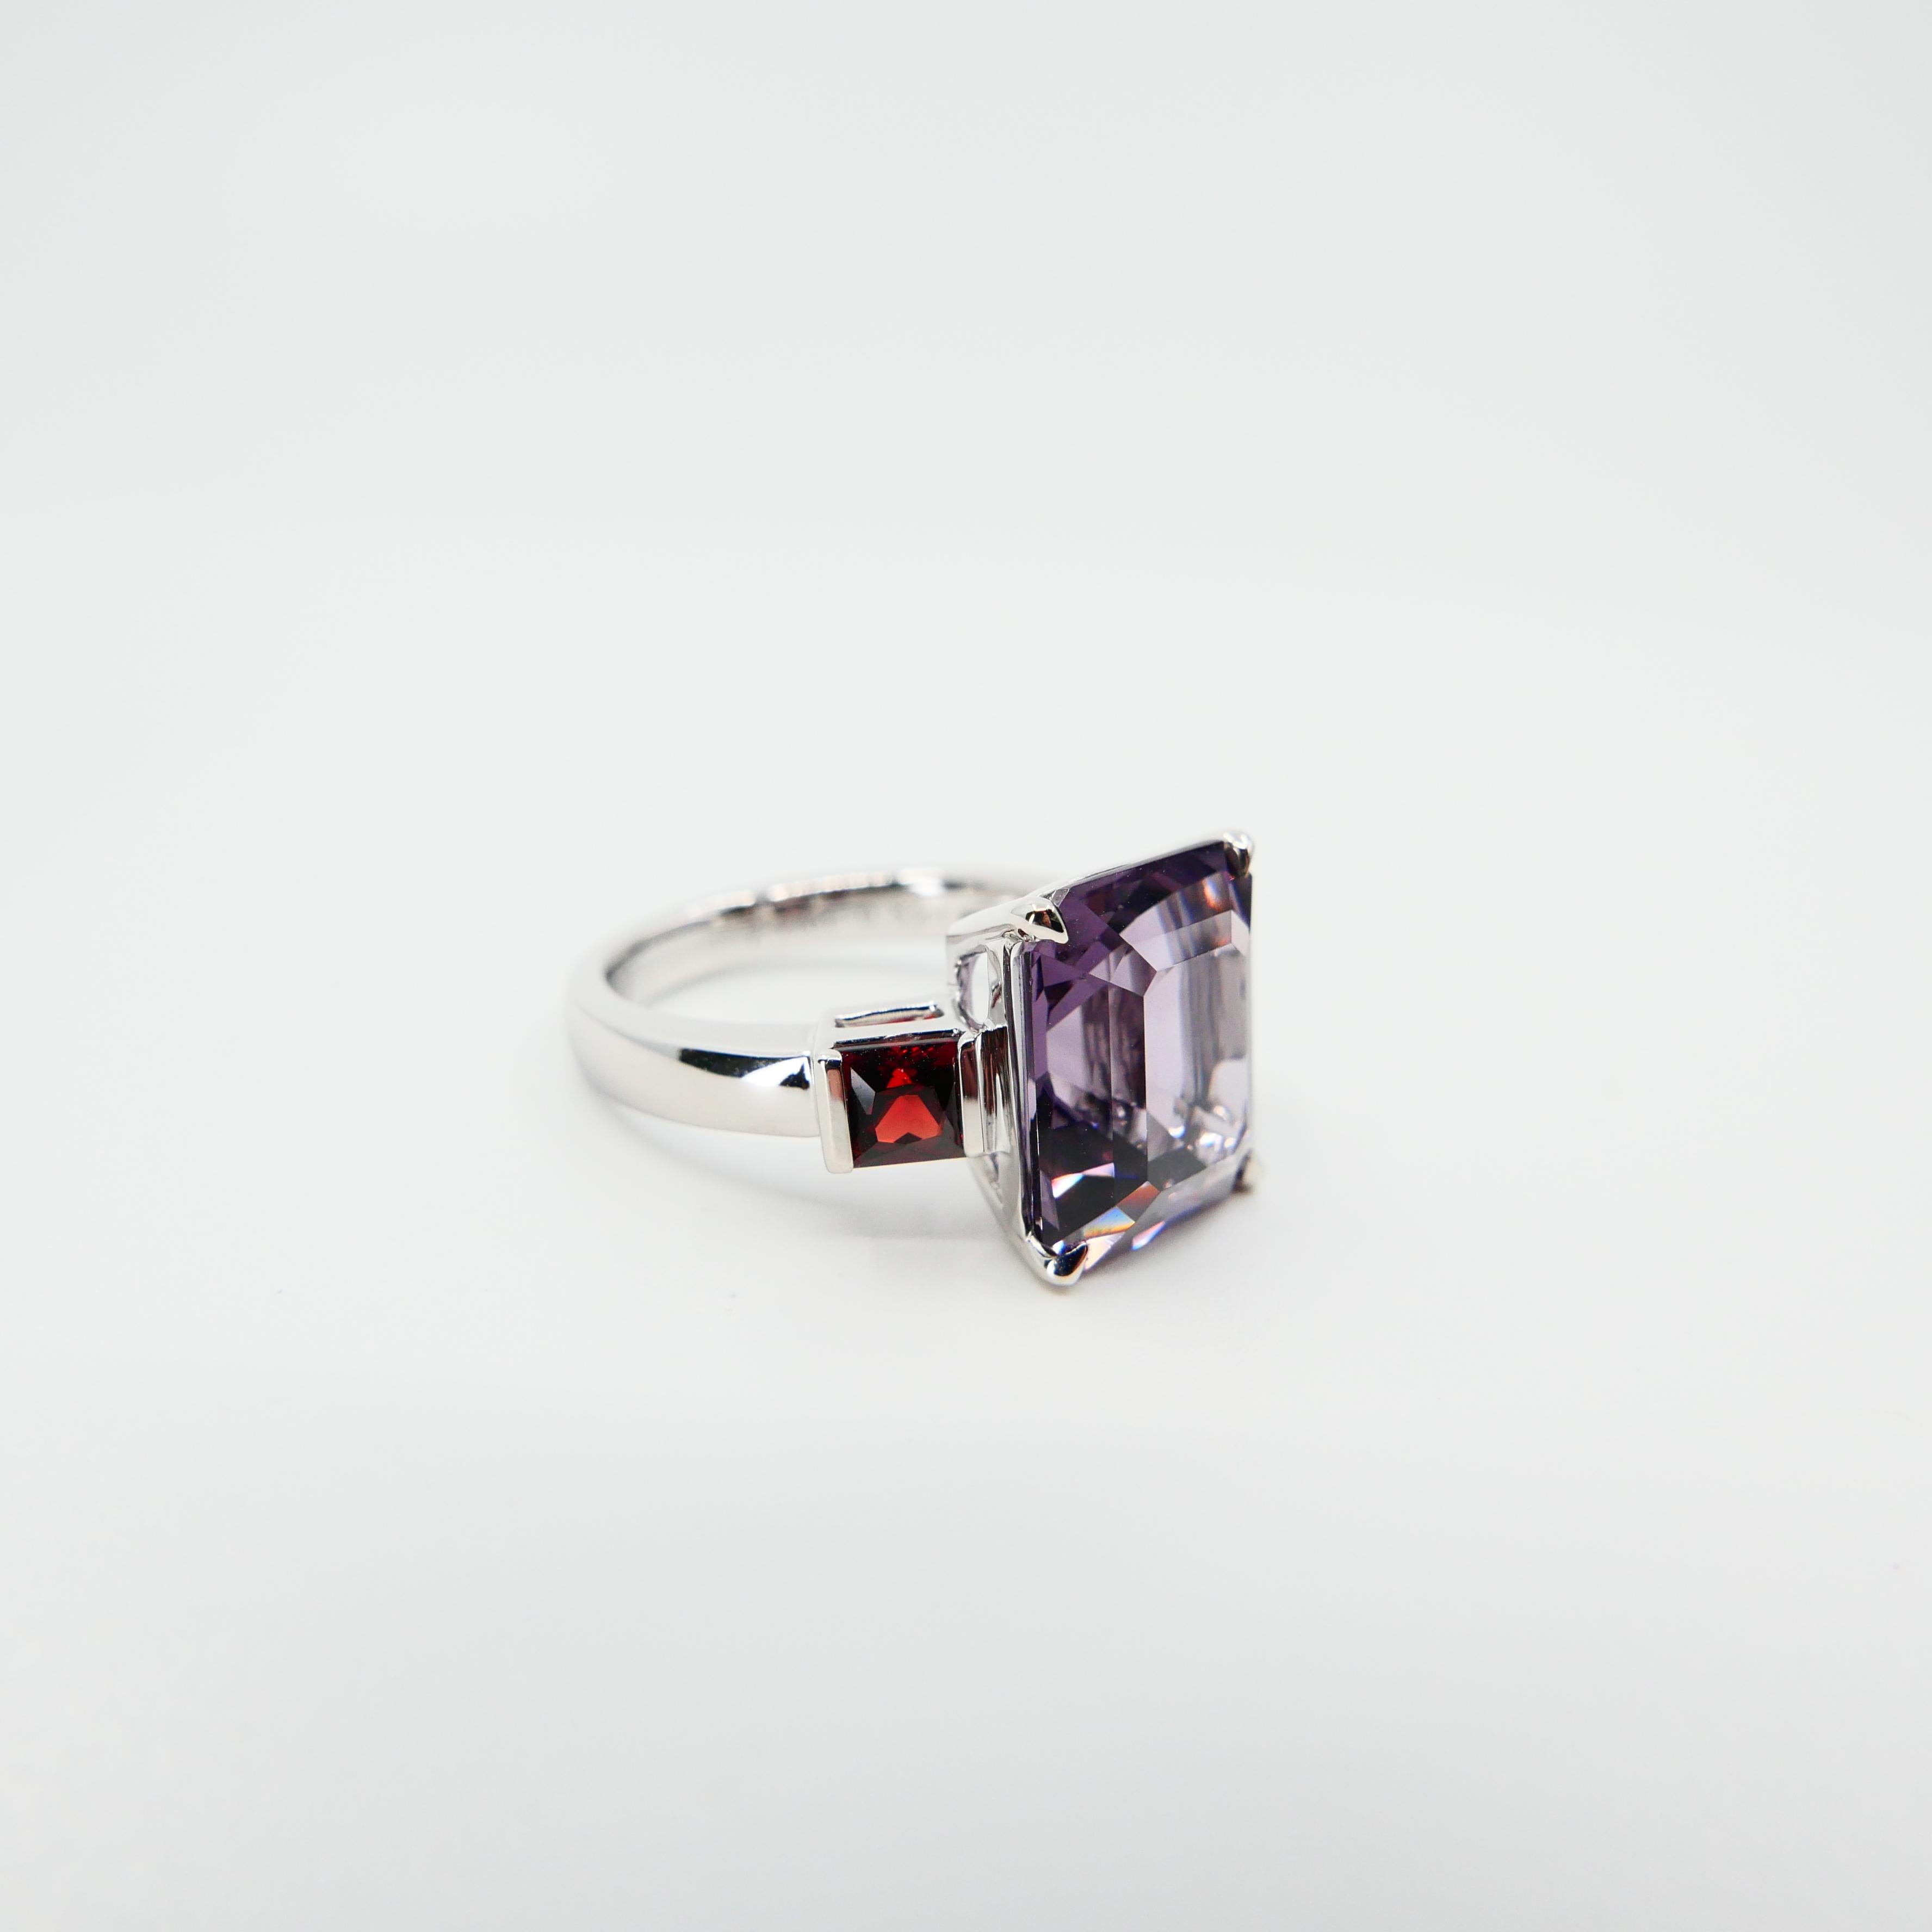 Natural 7.77 Cts Purple Spinel & 0.83 Carat Red Spinel Three-Stone Cocktail Ring 8